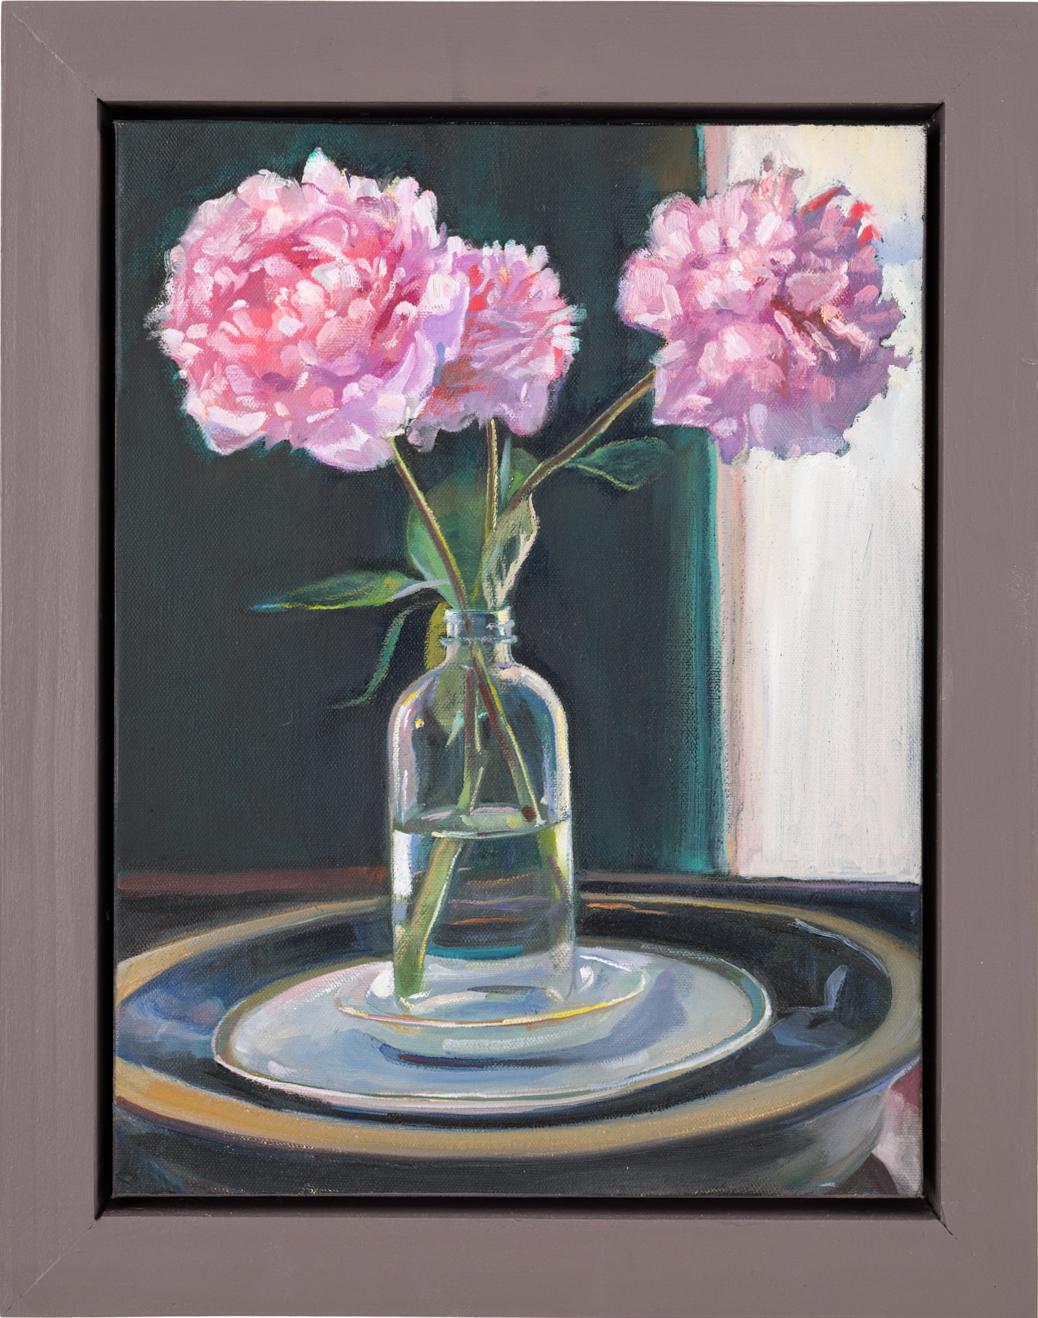 Peony (Still Life Painting of a Pink Flower in an Interior Setting, Framed)